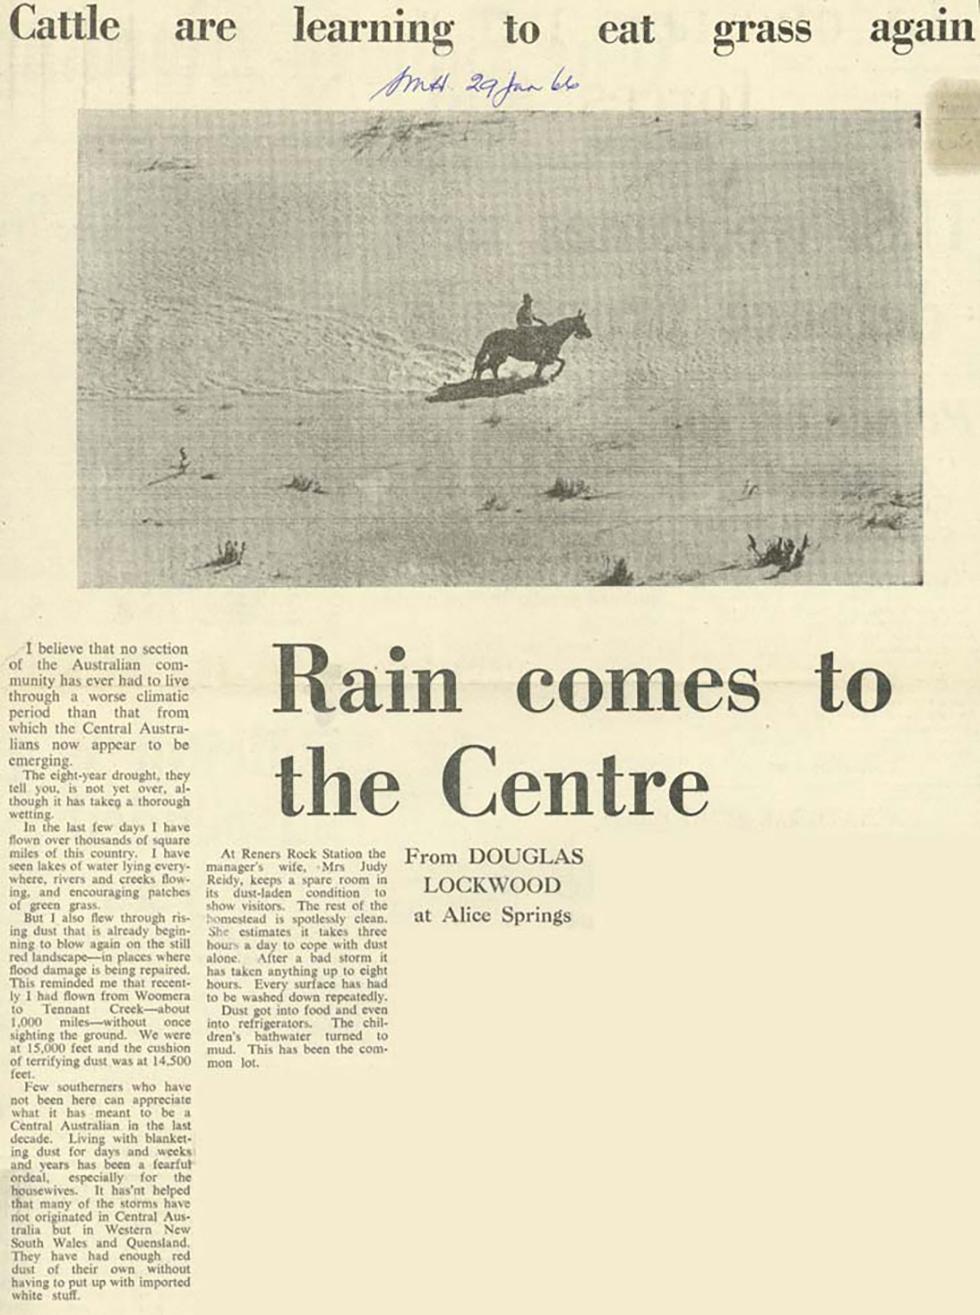 Extract from a newspaper article on rain in Central Australia. 